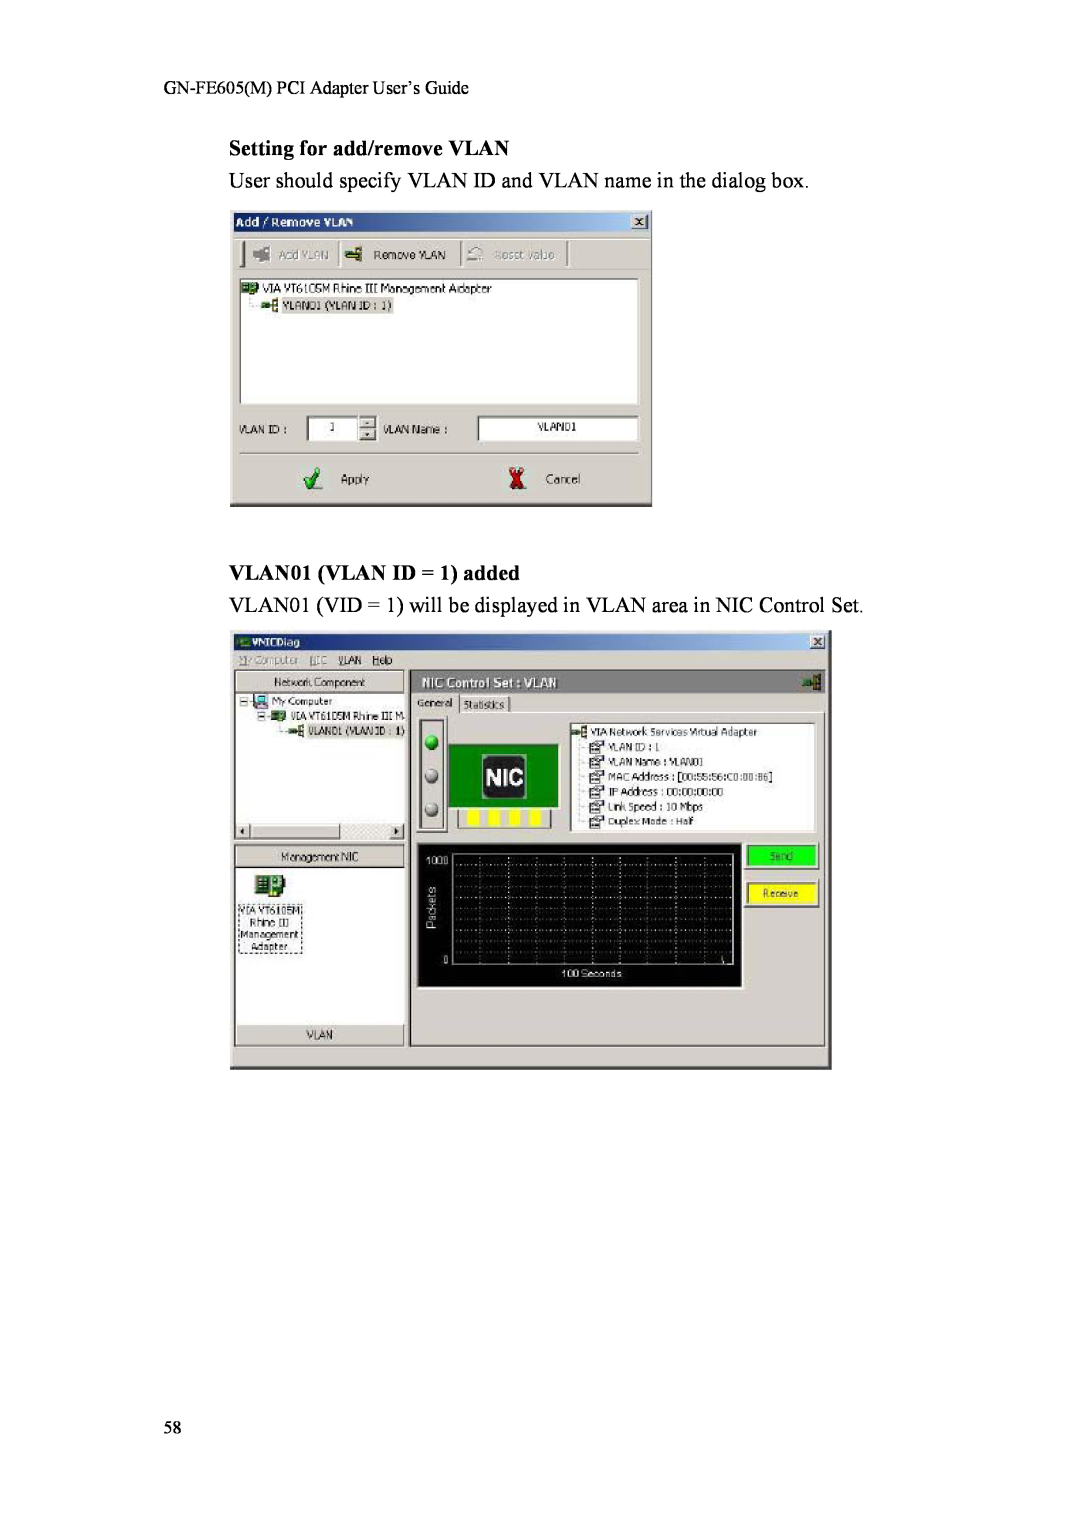 Gigabyte GN-FE605(M) manual Setting for add/remove VLAN, User should specify VLAN ID and VLAN name in the dialog box 